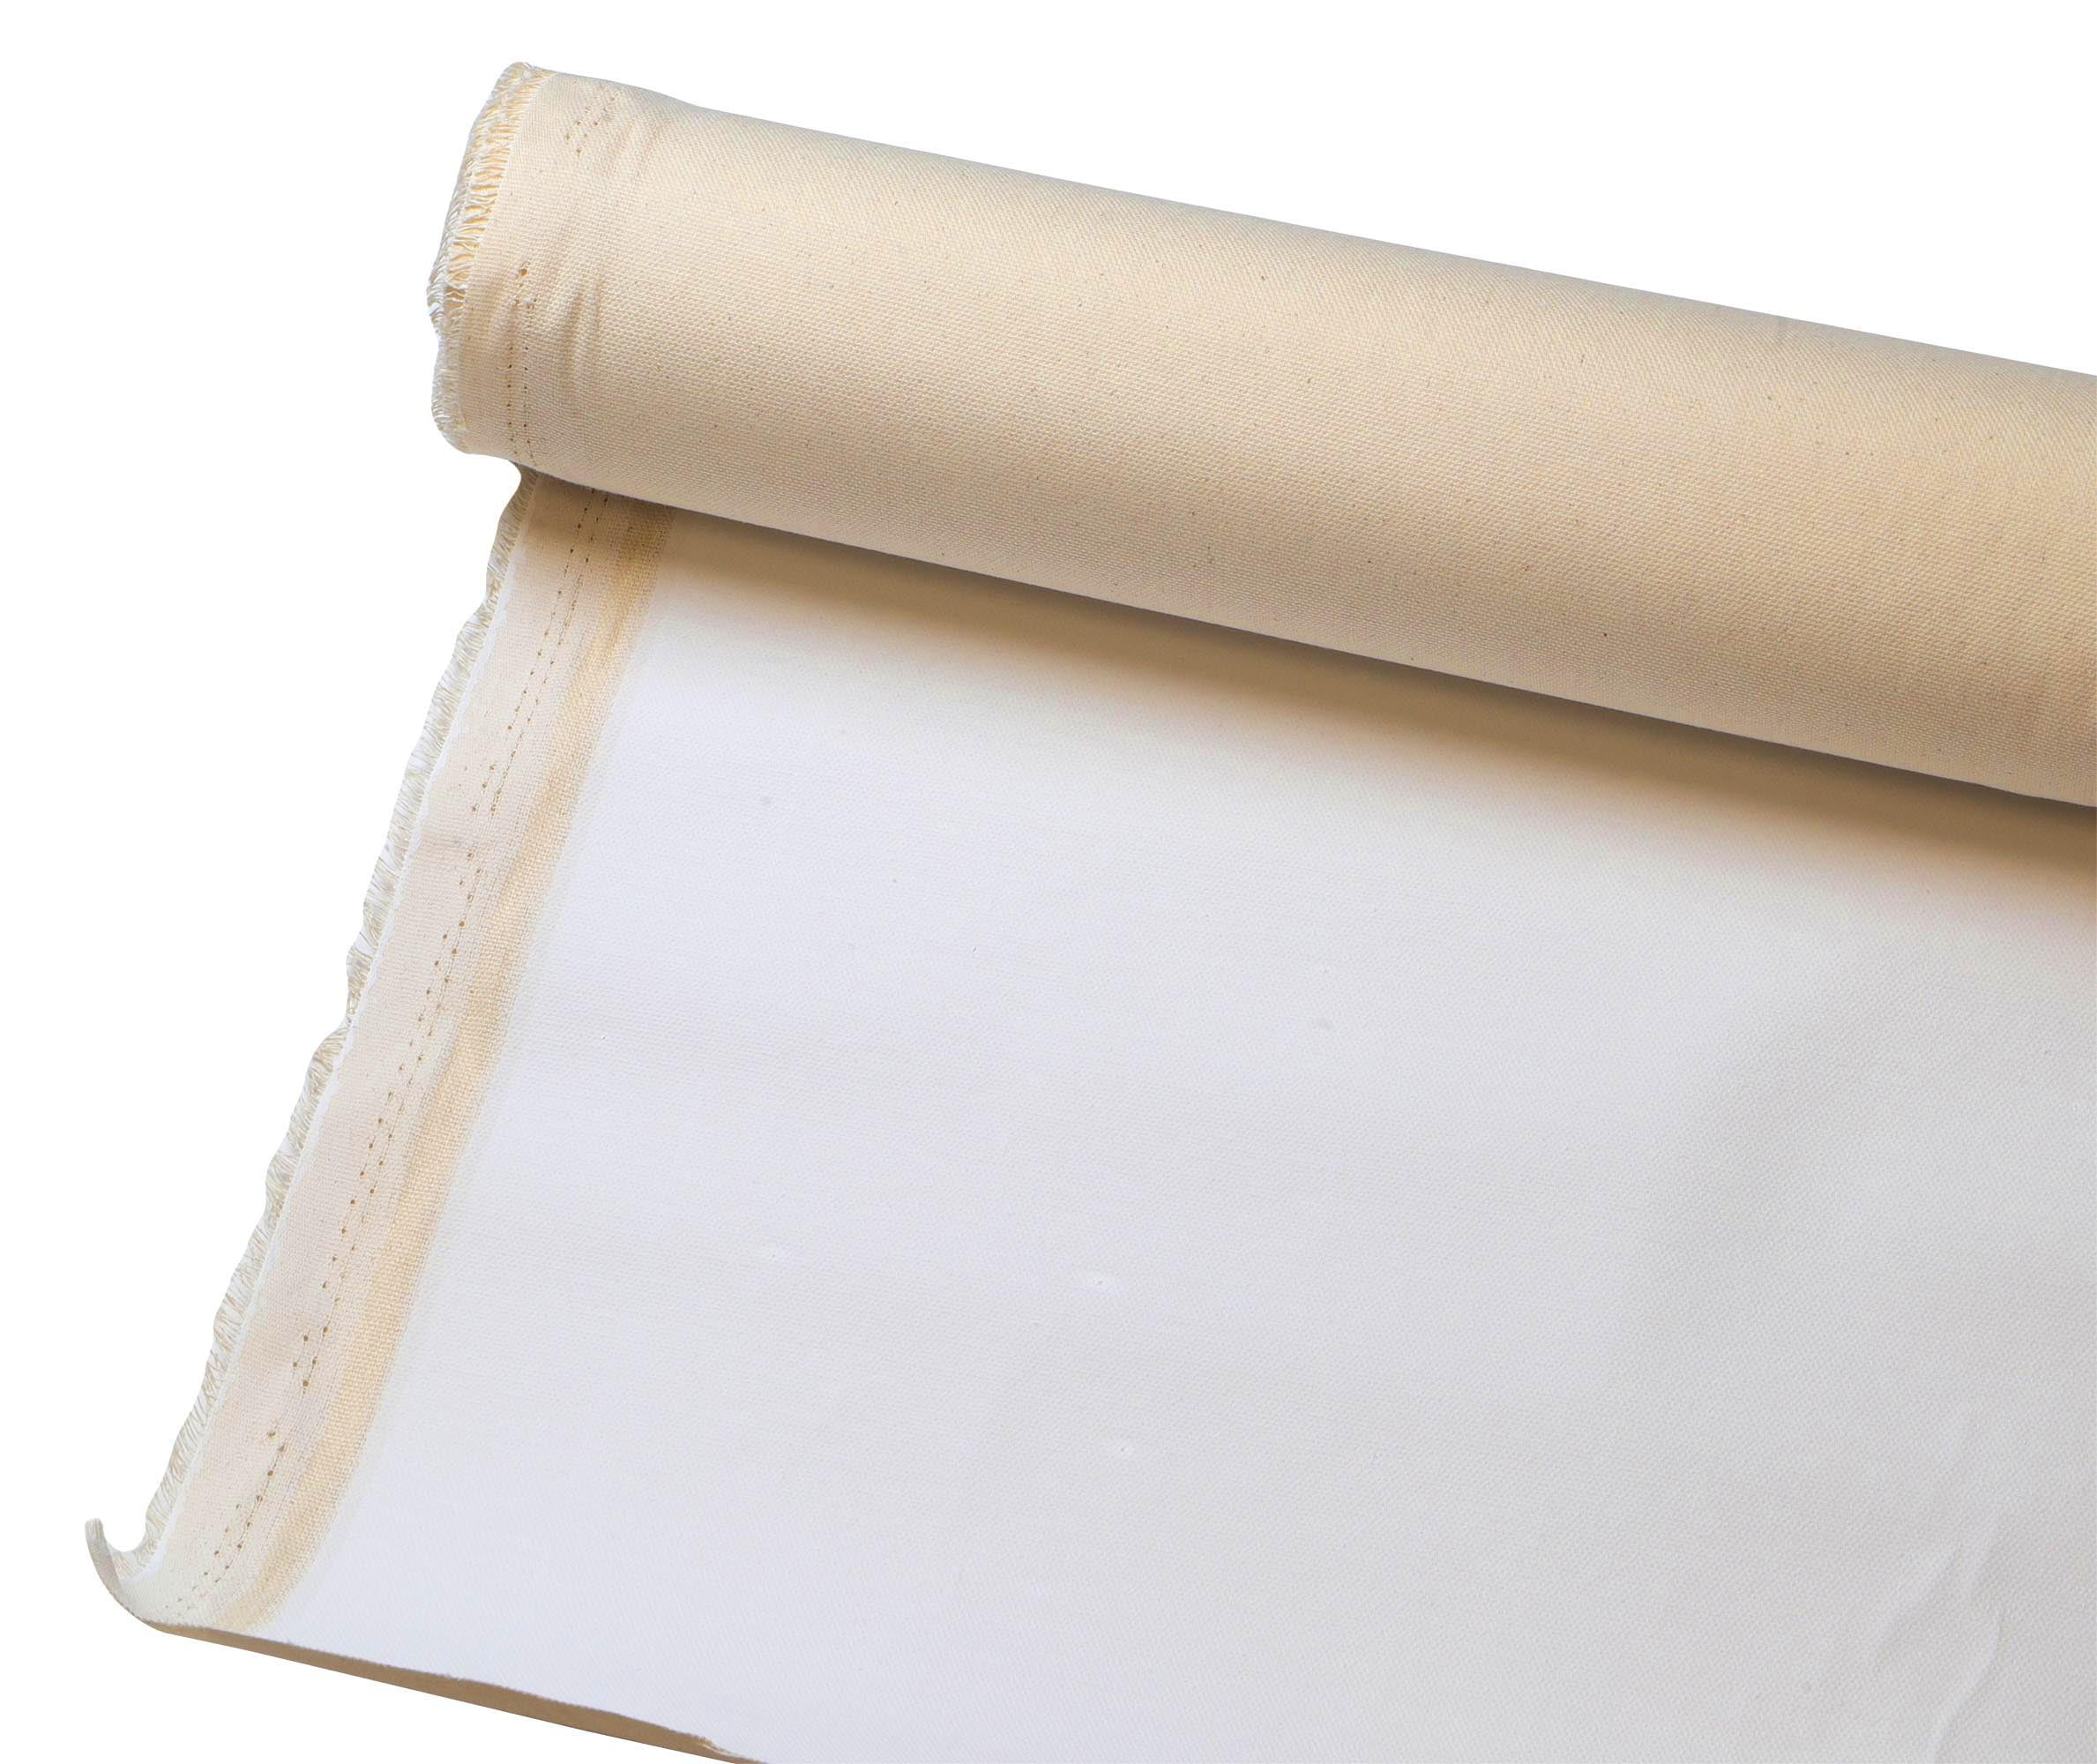 Pro Art Tracing Paper Sketch 36x50yd Roll Canary